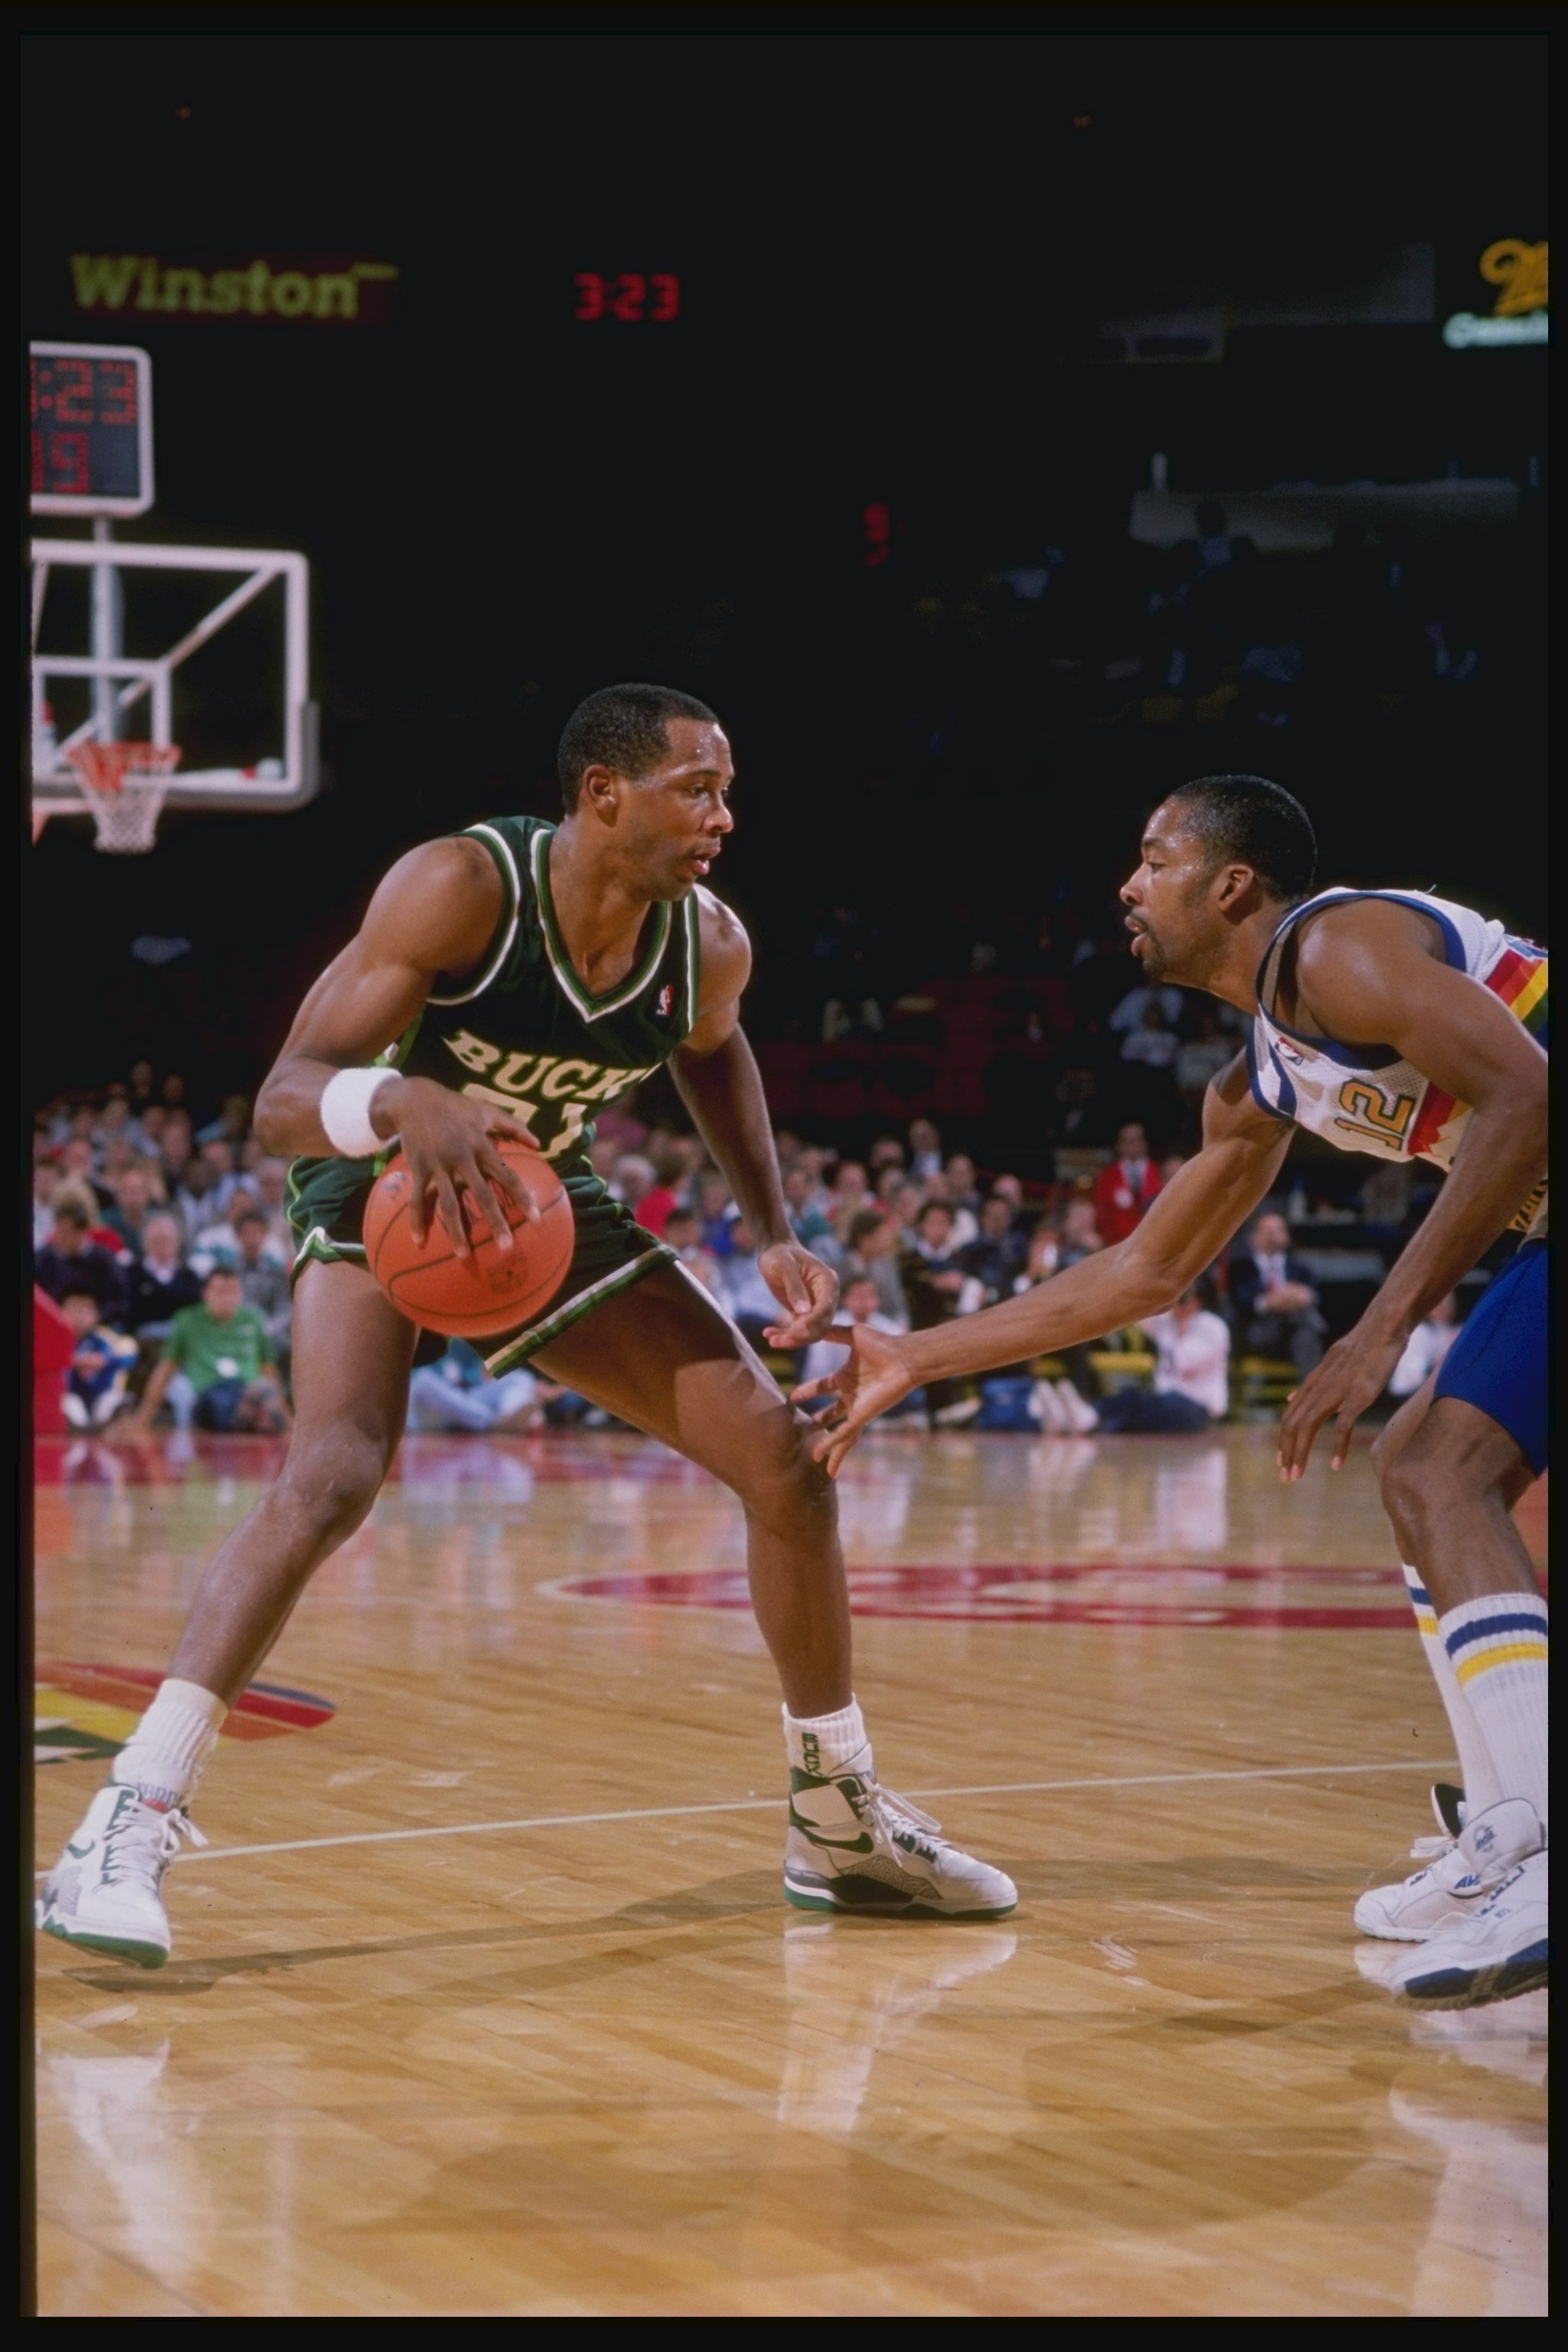 1989-1990:  Guard Alvin Robertson of the Milwaukee Bucks (left) in action with the ball during a game against the Denver Nuggets at McNichols Arena in Denver, Colorado. Mandatory Credit: Tim de Frisco  /Allsport